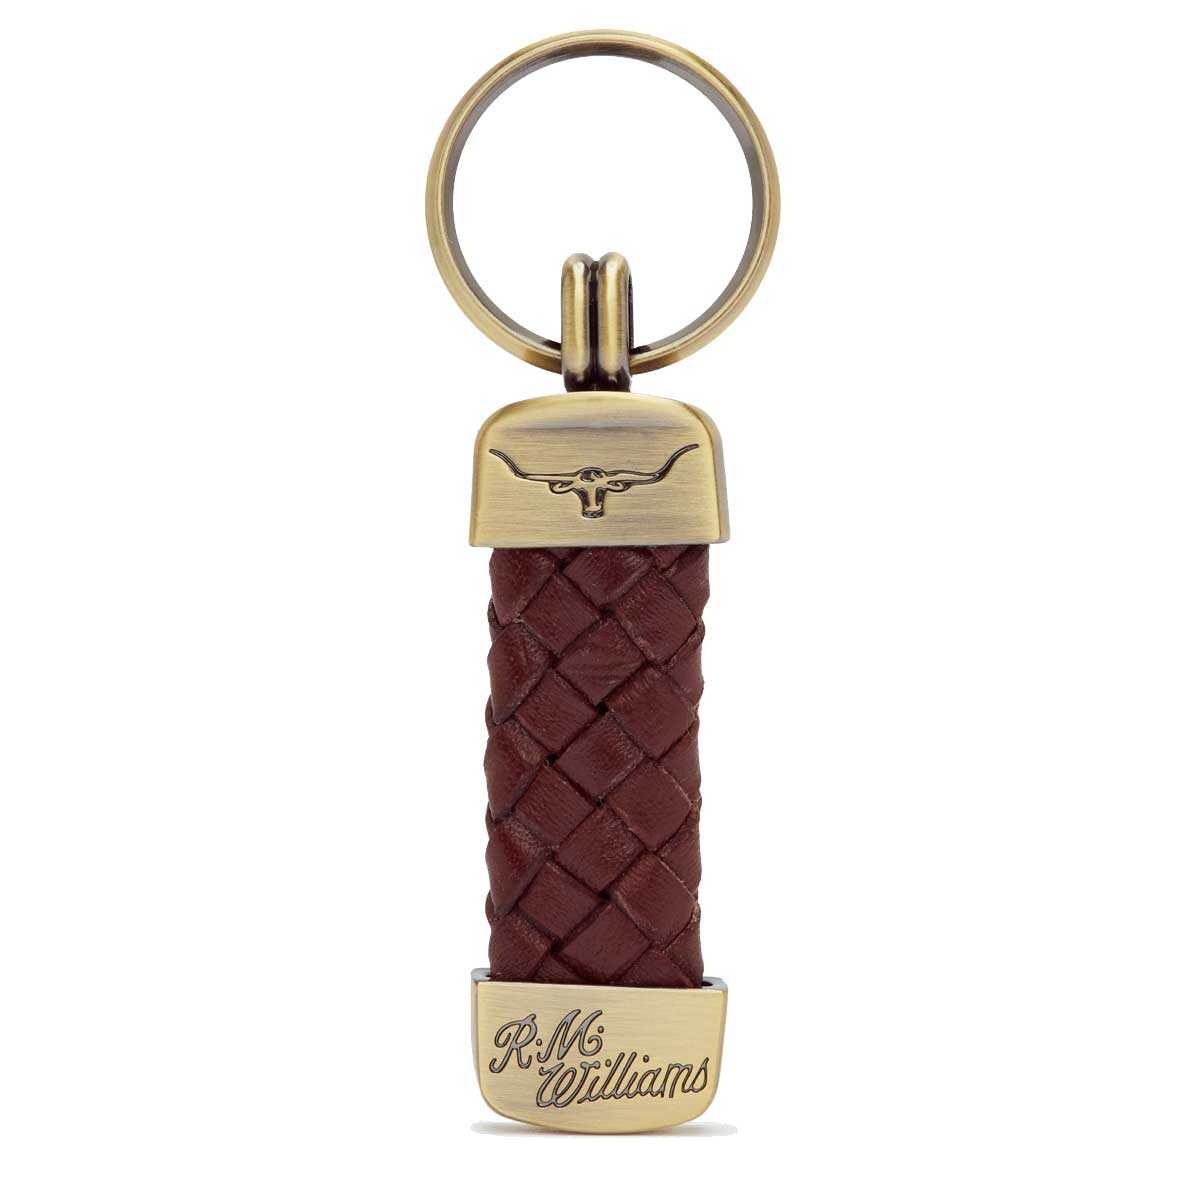 RM WILLIAMS Plaited Key Ring - Brown & Brass